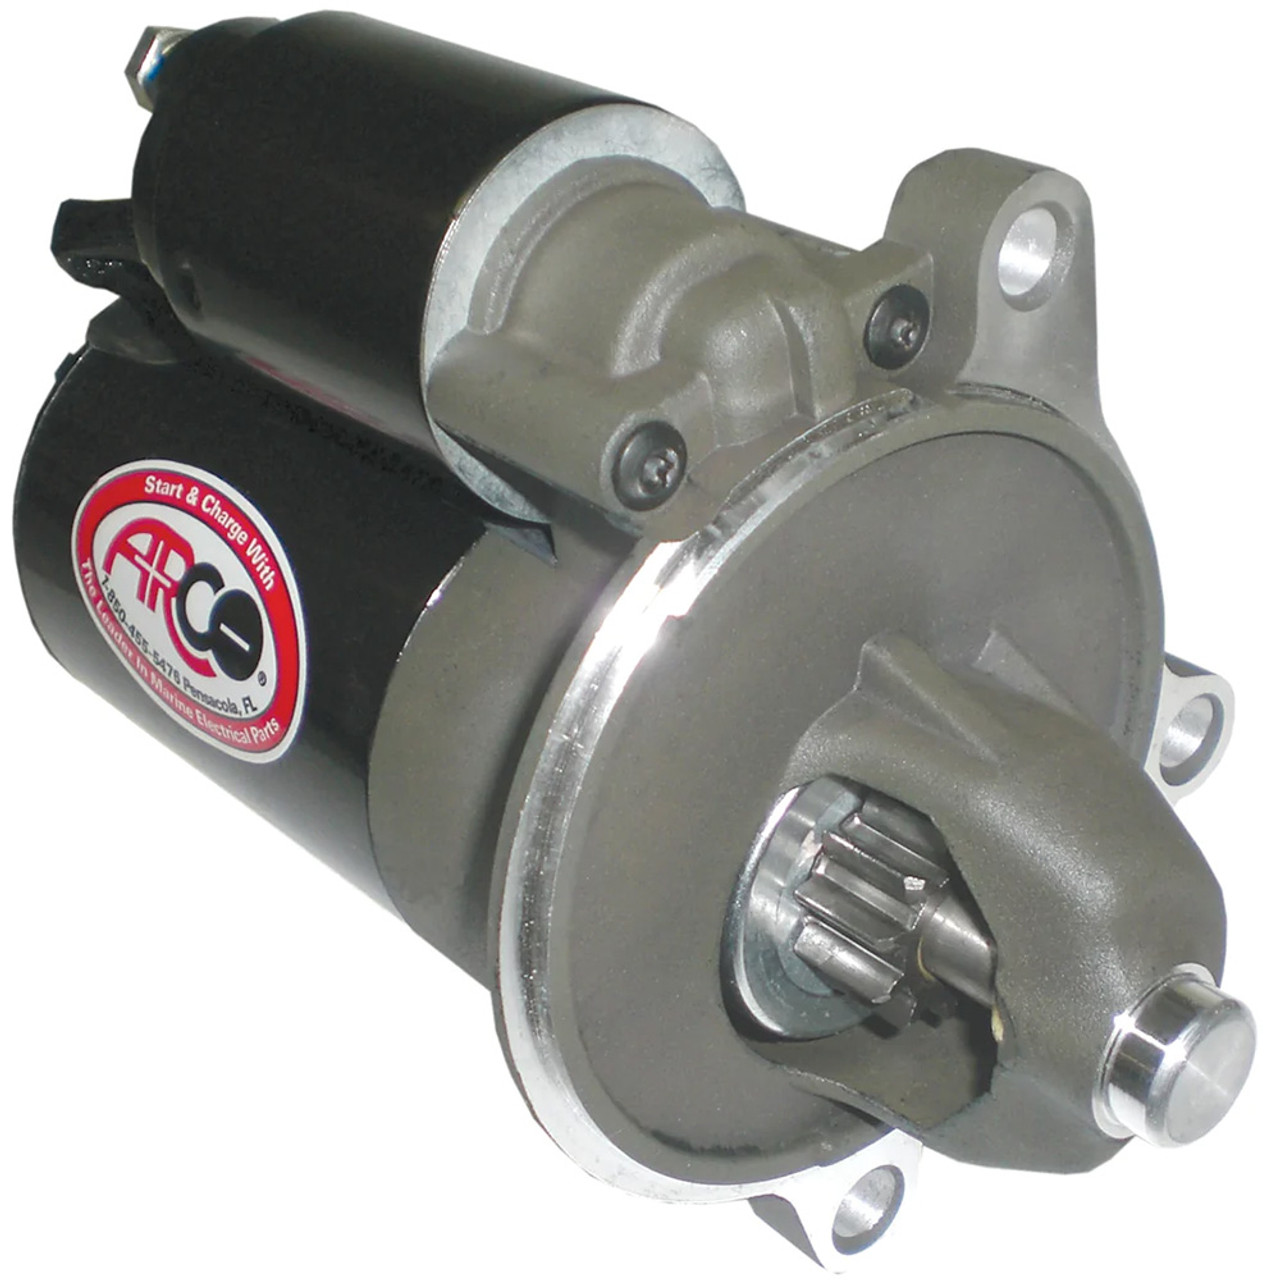 ARCO Marine High-Performance Inboard Starter w\/Gear Reduction  Permanent Magnet - Clockwise Rotation (2.3 Fords) [70216]